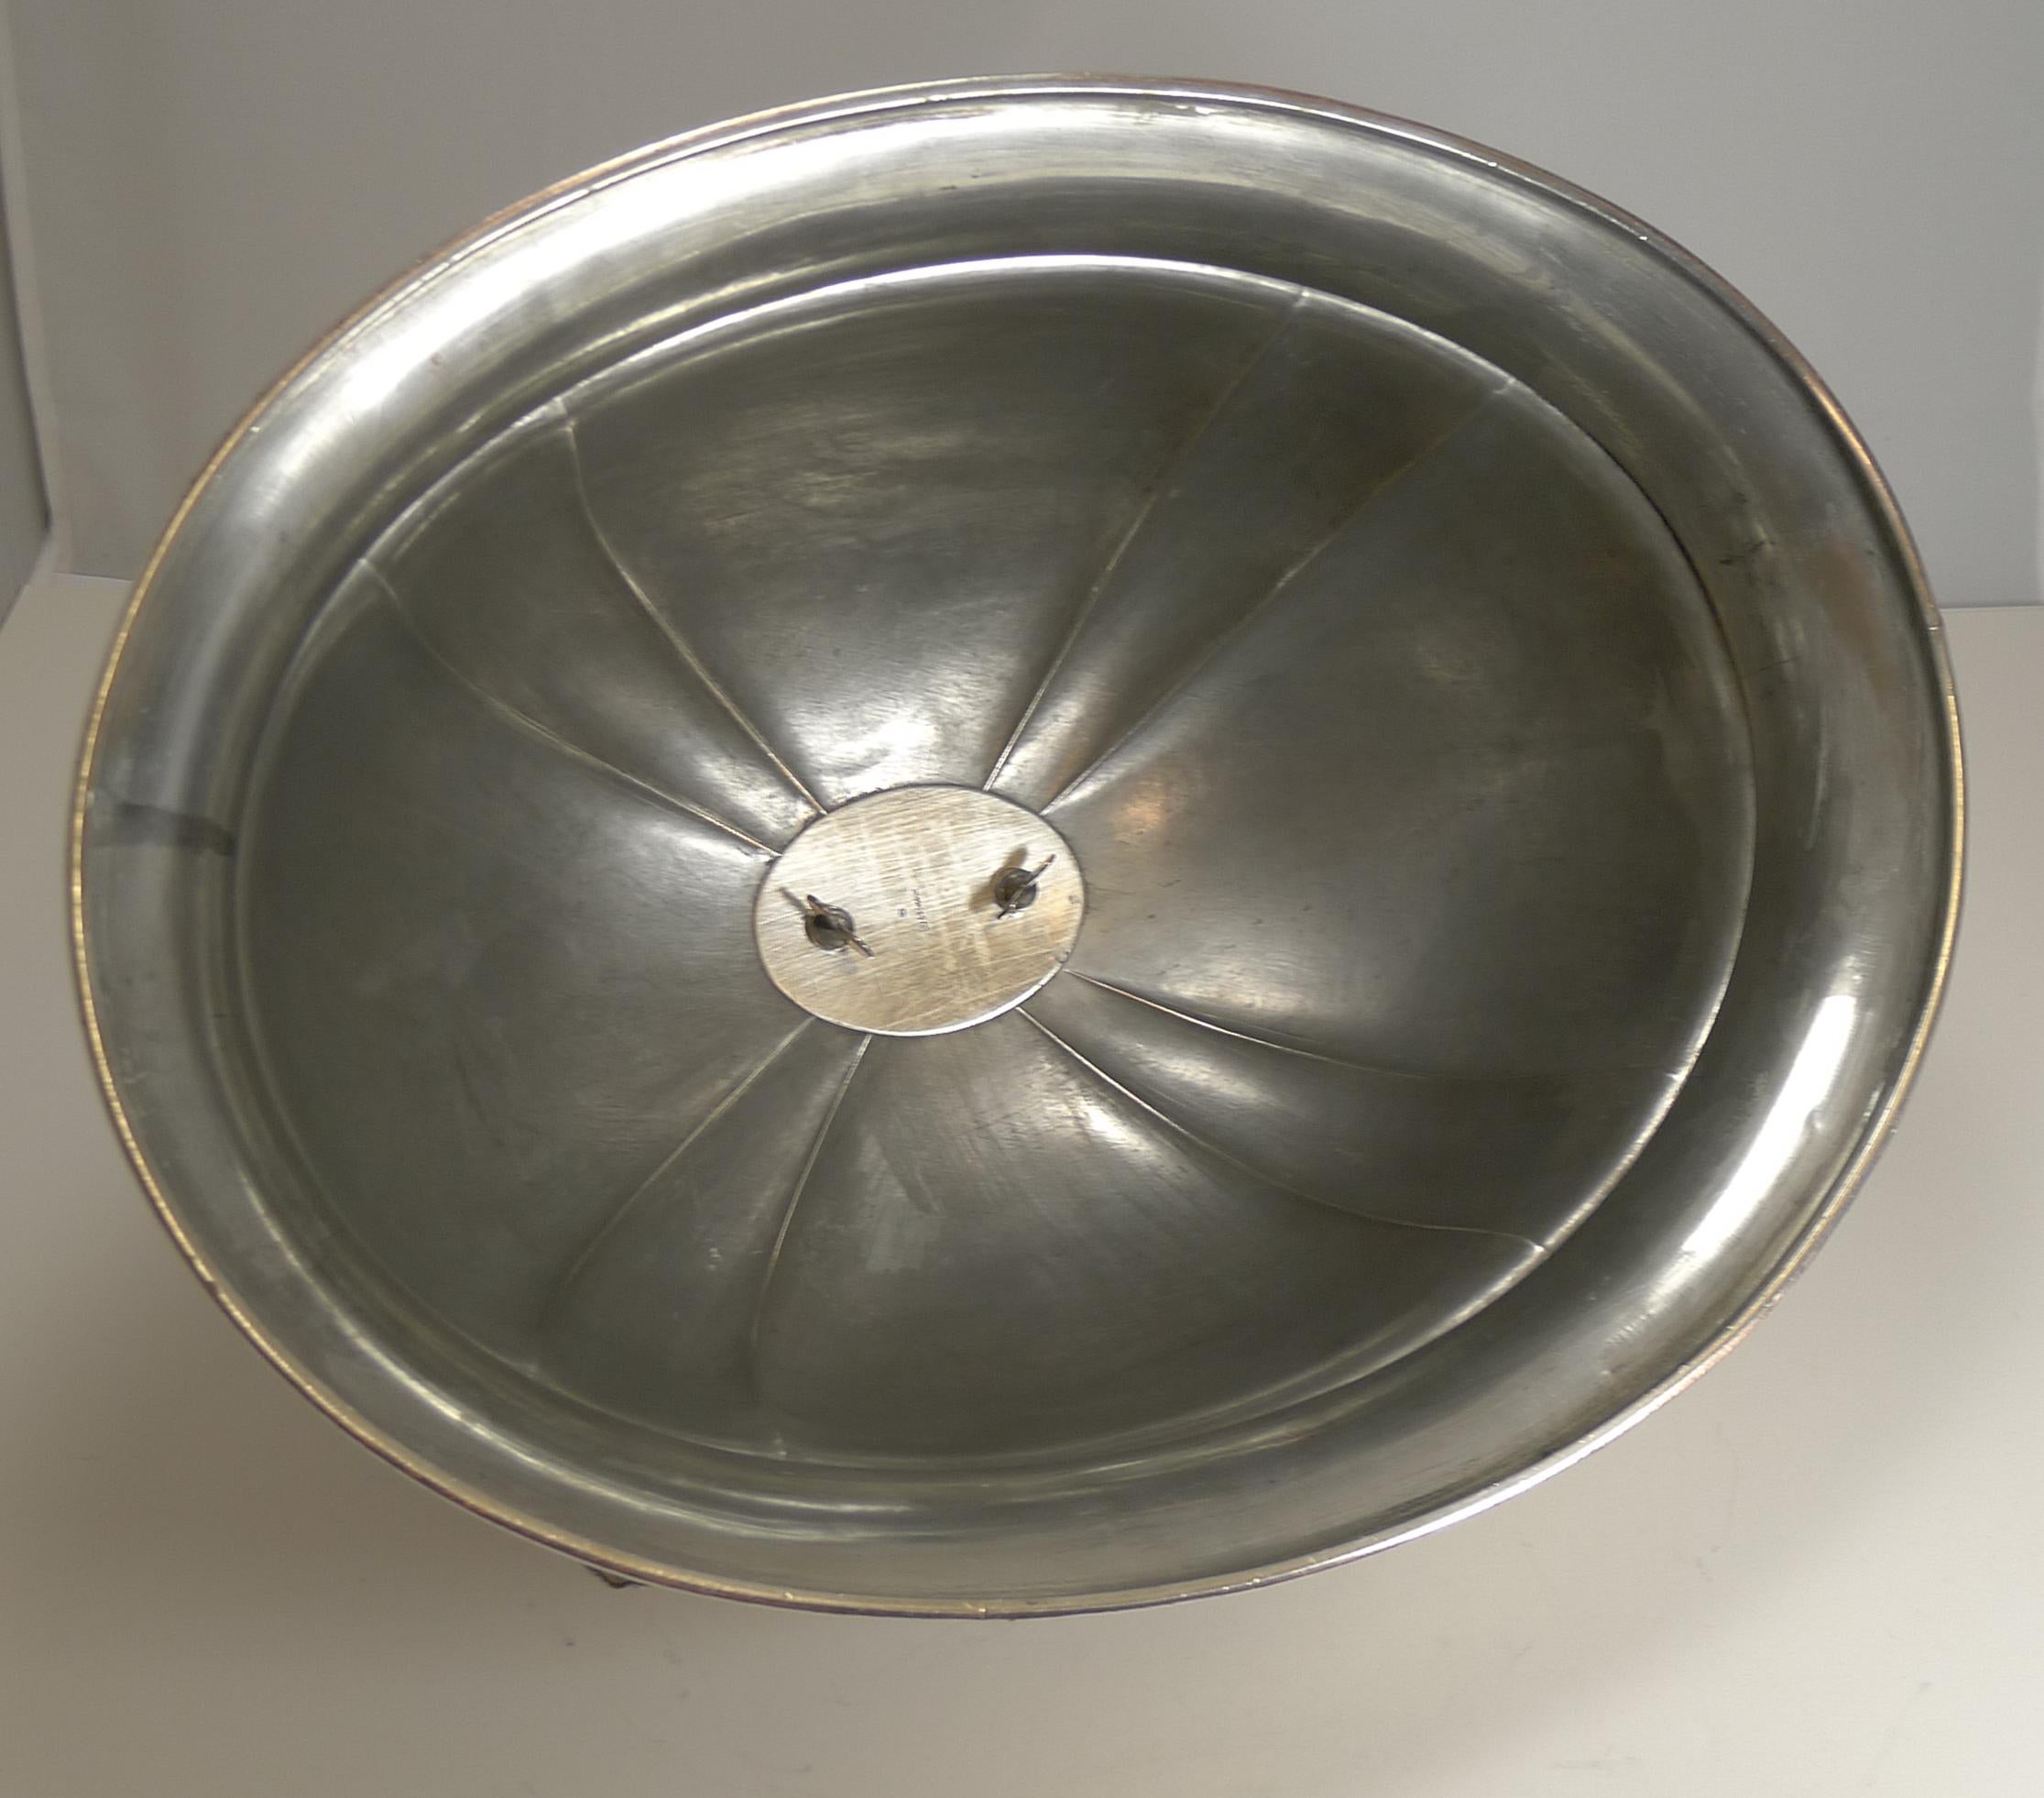 Silver Plate Grand Antique English Old Sheffield Plate Meat / Food Domed Cover, circa 1842